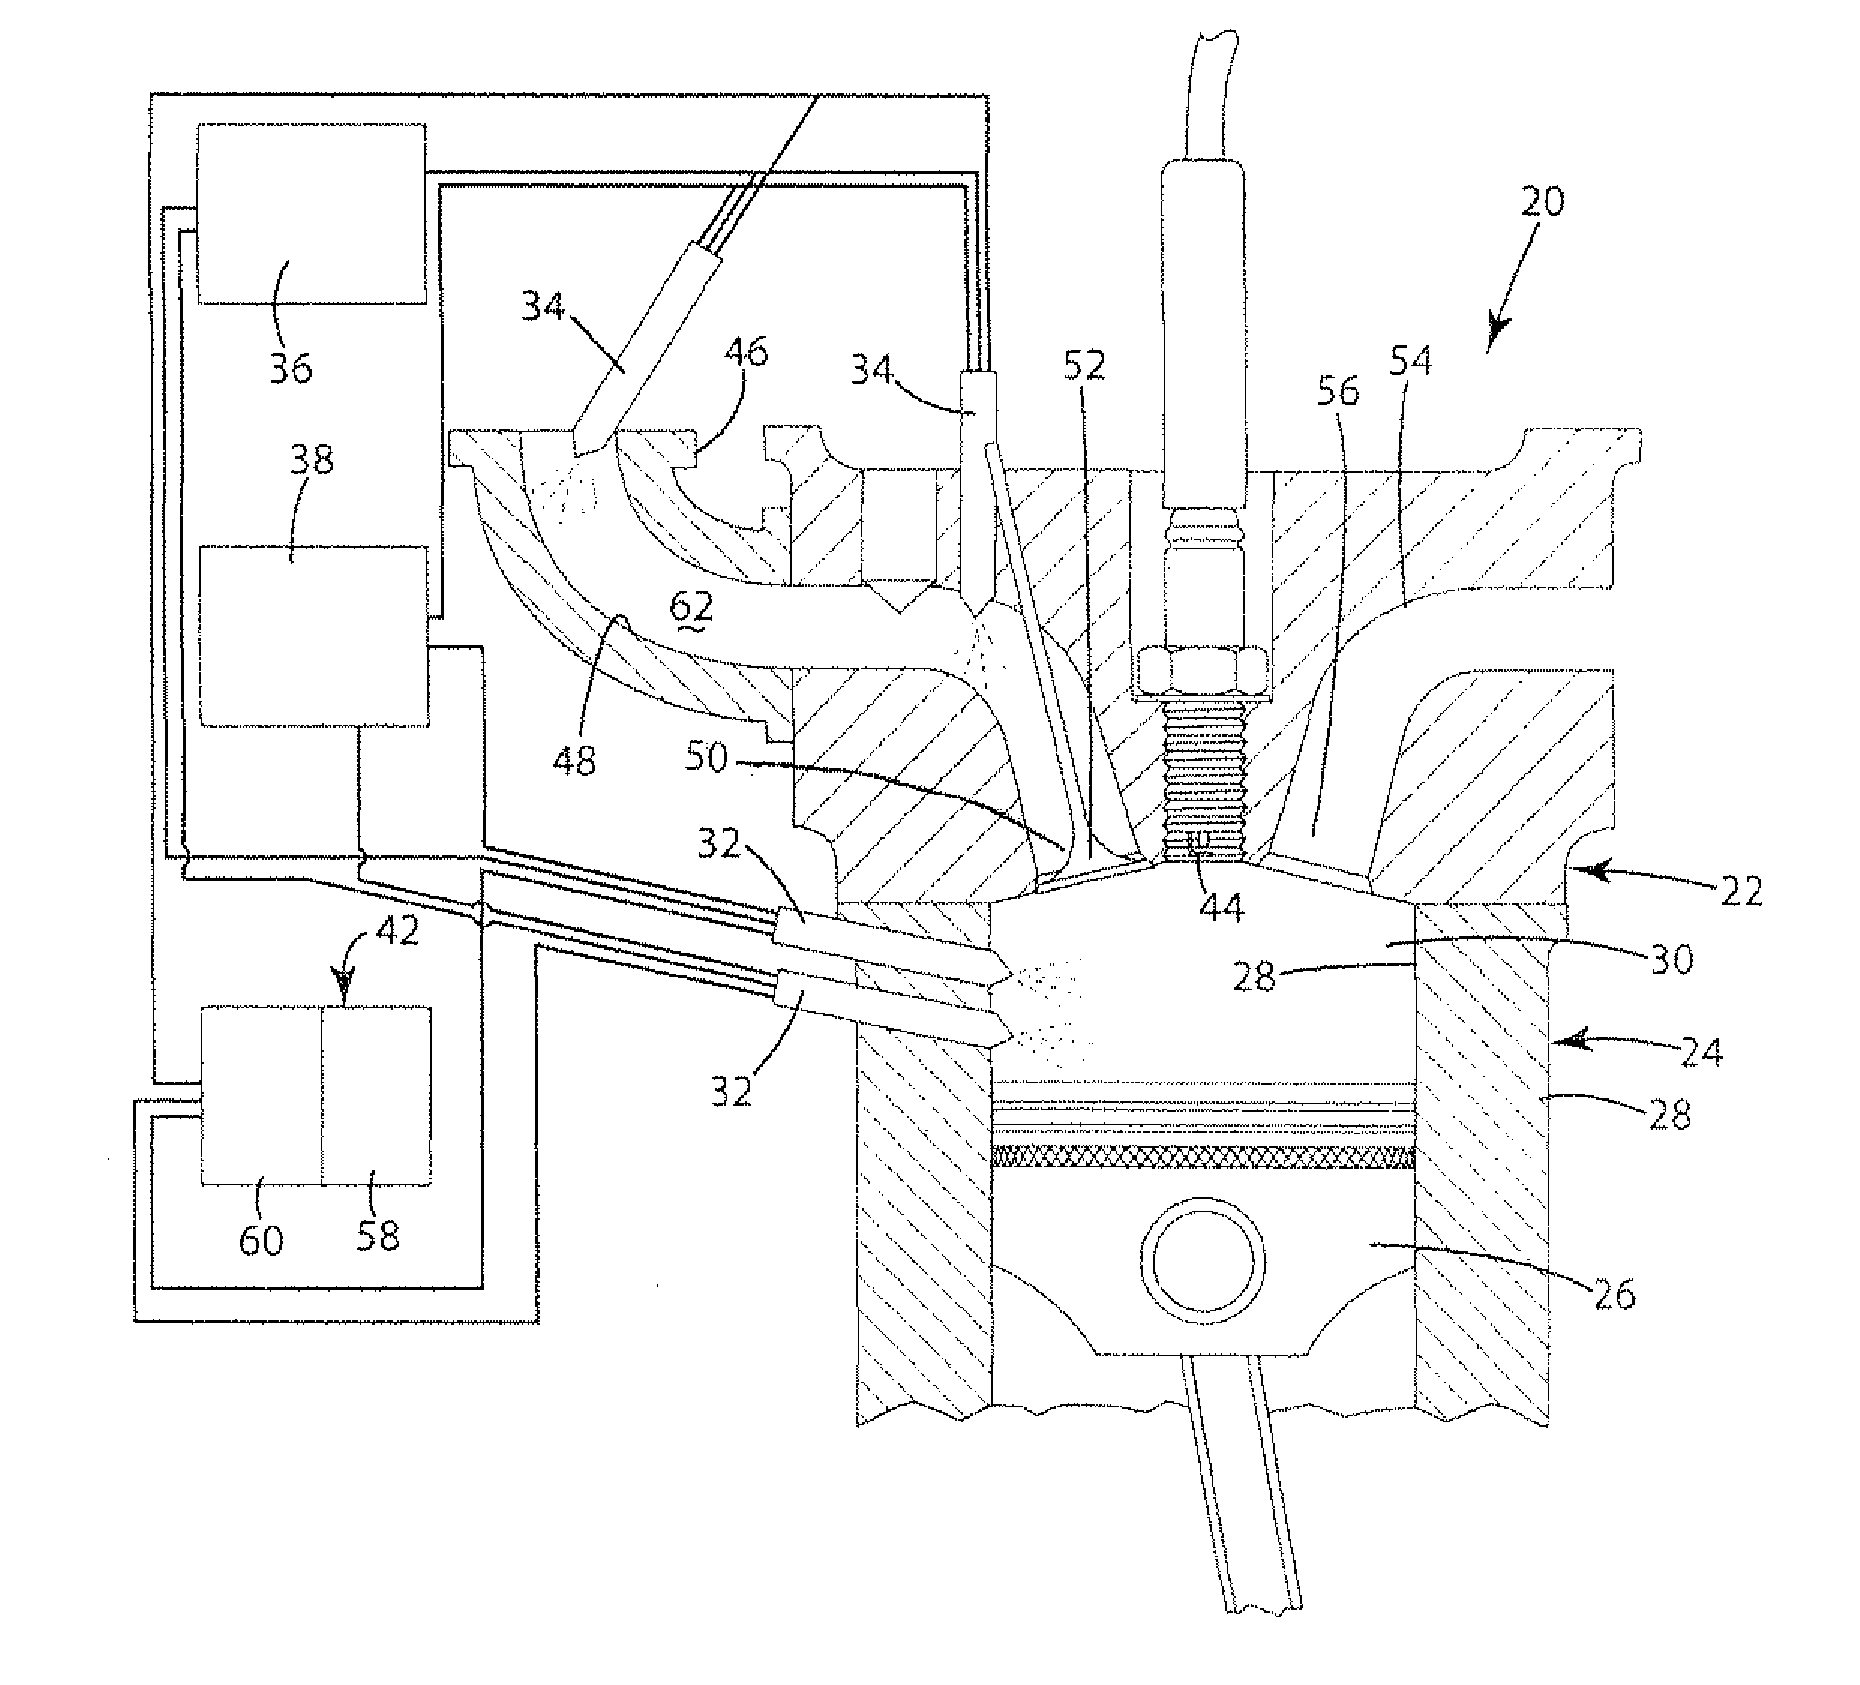 Methods Of Controlling An Internal Combustion Engine Including Multiple Fuels And Multiple Injectors